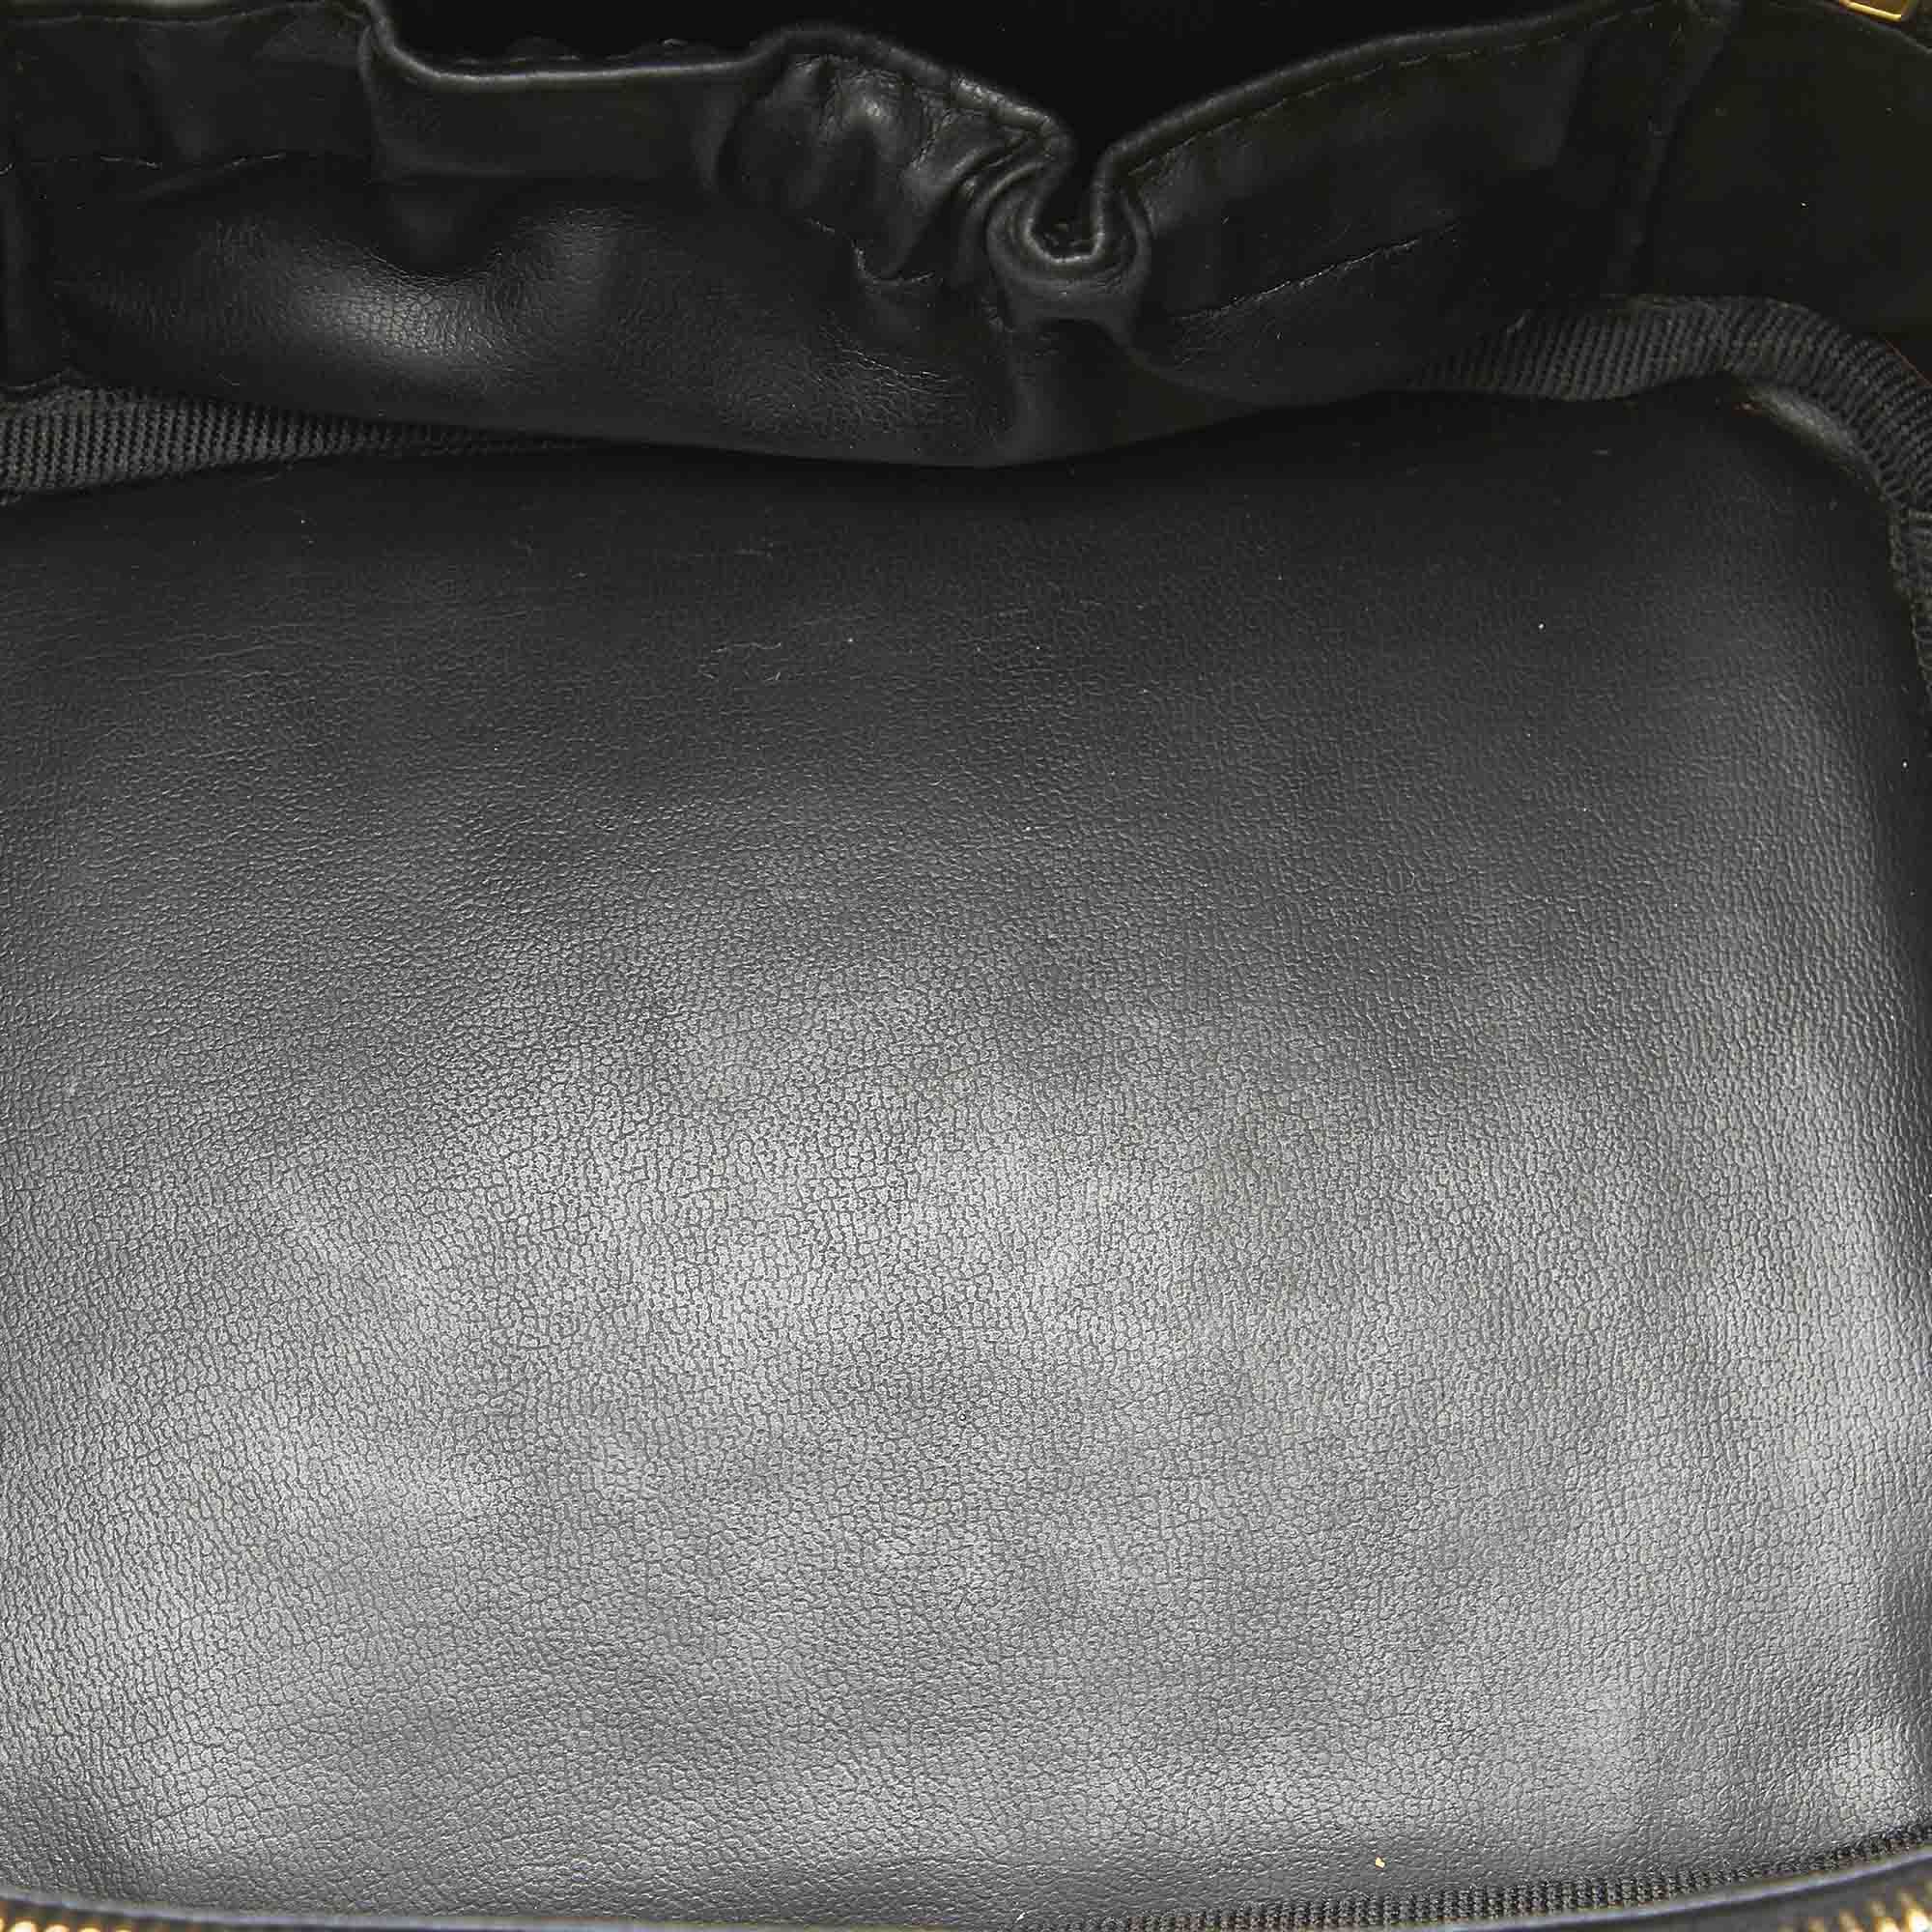 VINTAGE. RRP AS NEW. This vanity bag features a leather body with a quilted leather bottom, a flat top handle, a two way top zip around closure, and an interior slip pocket.
Dimensions:
Length 10.3cm
Width 19cm
Depth 13.7cm
Hand Drop 2cm
Shoulder Drop 2cm

Original Accessories: This item has no other original accessories.

Color: Black
Material: Leather x Lambskin Leather
Country of Origin: France
Boutique Reference: SSU97083K1342


Product Rating: GoodCondition